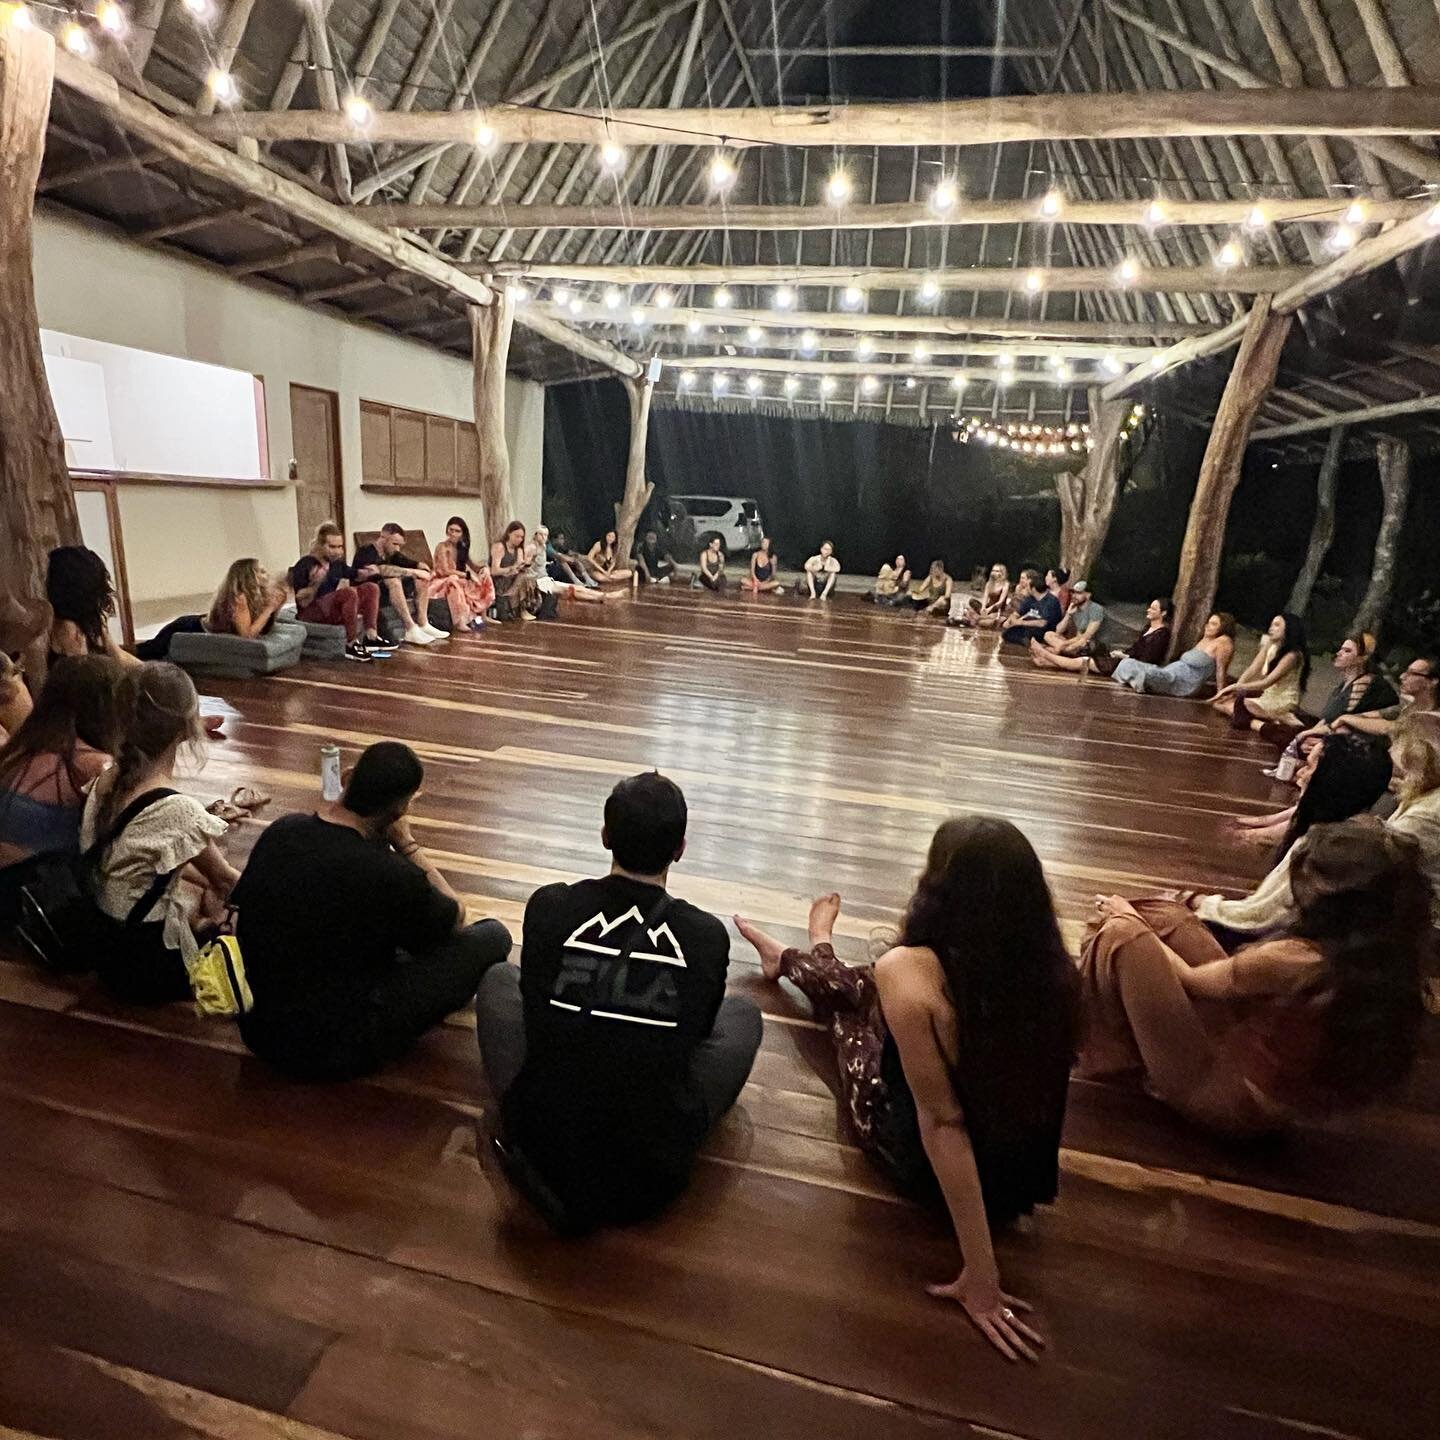 Our latest intimate medicine retreat has begun and the vibes are strong at opening circle&hellip; looking forward to an epic experience with these 40 beautiful souls ✨